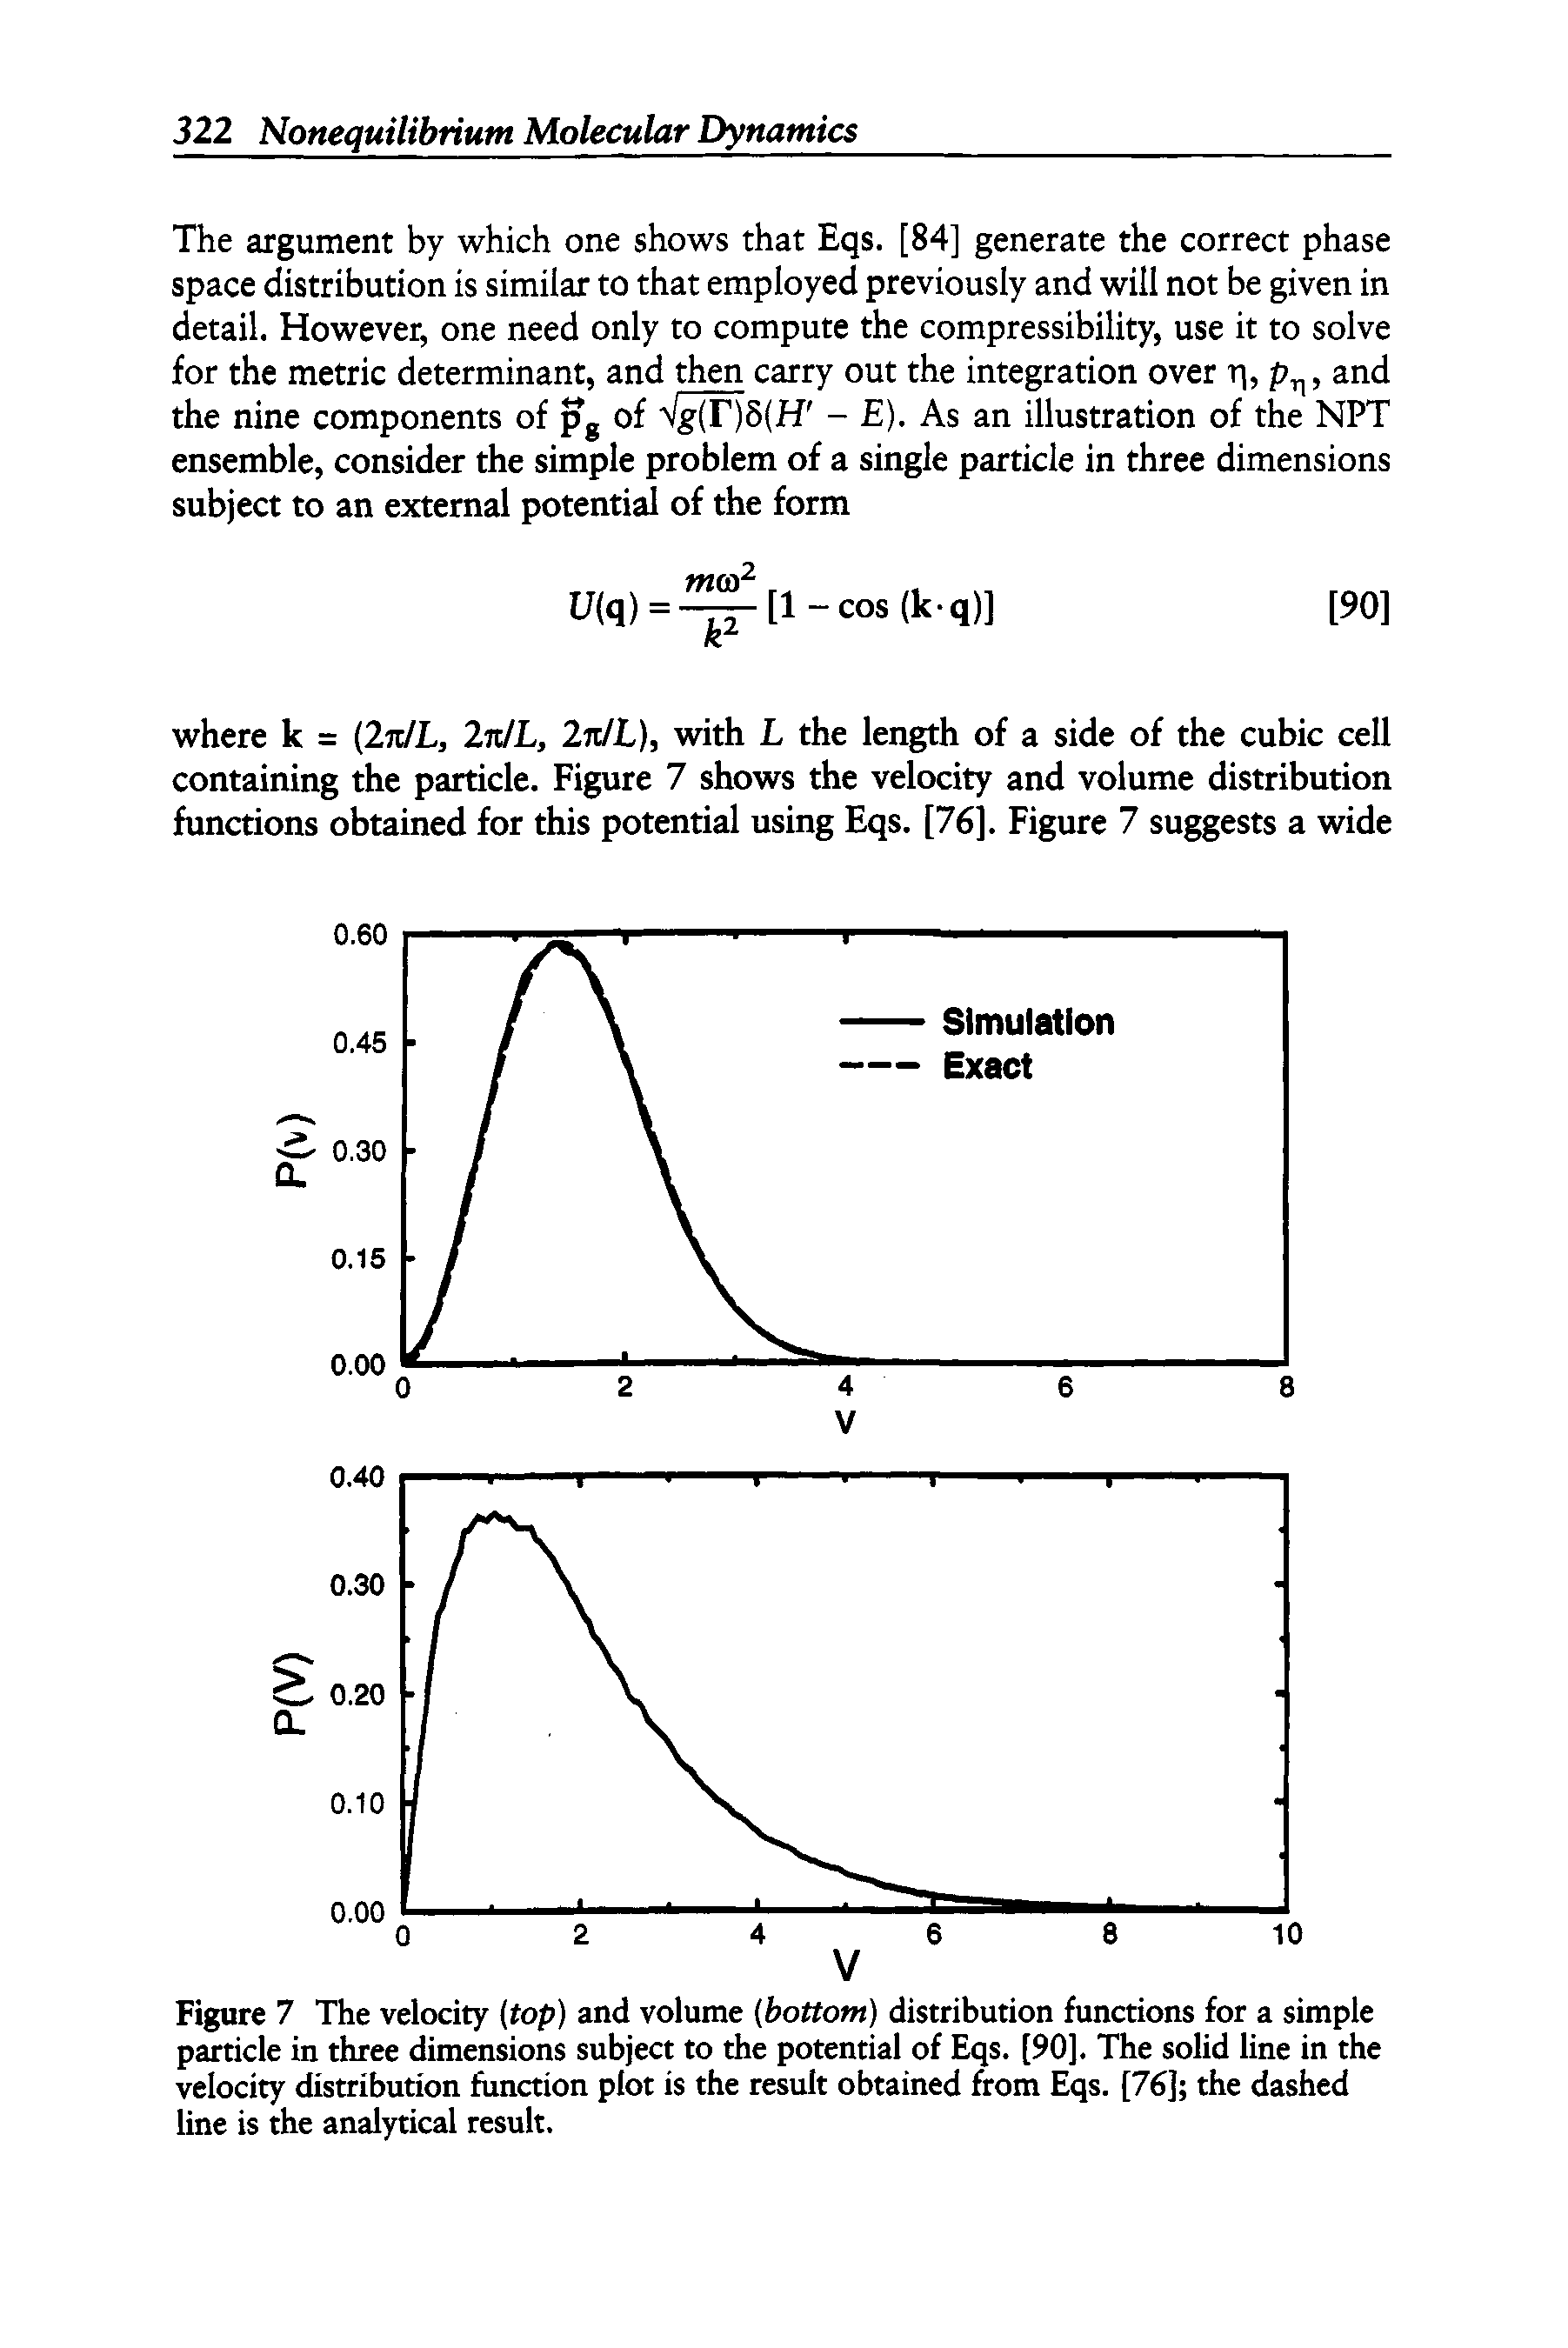 Figure 7 The velocity (top) and volume (bottom) distribution functions for a simple particle in three dimensions subject to the potential of Eqs. [90]. The solid line in the velocity distribution function plot is the result obtained from Eqs. [76] the dashed line is the analytical result.